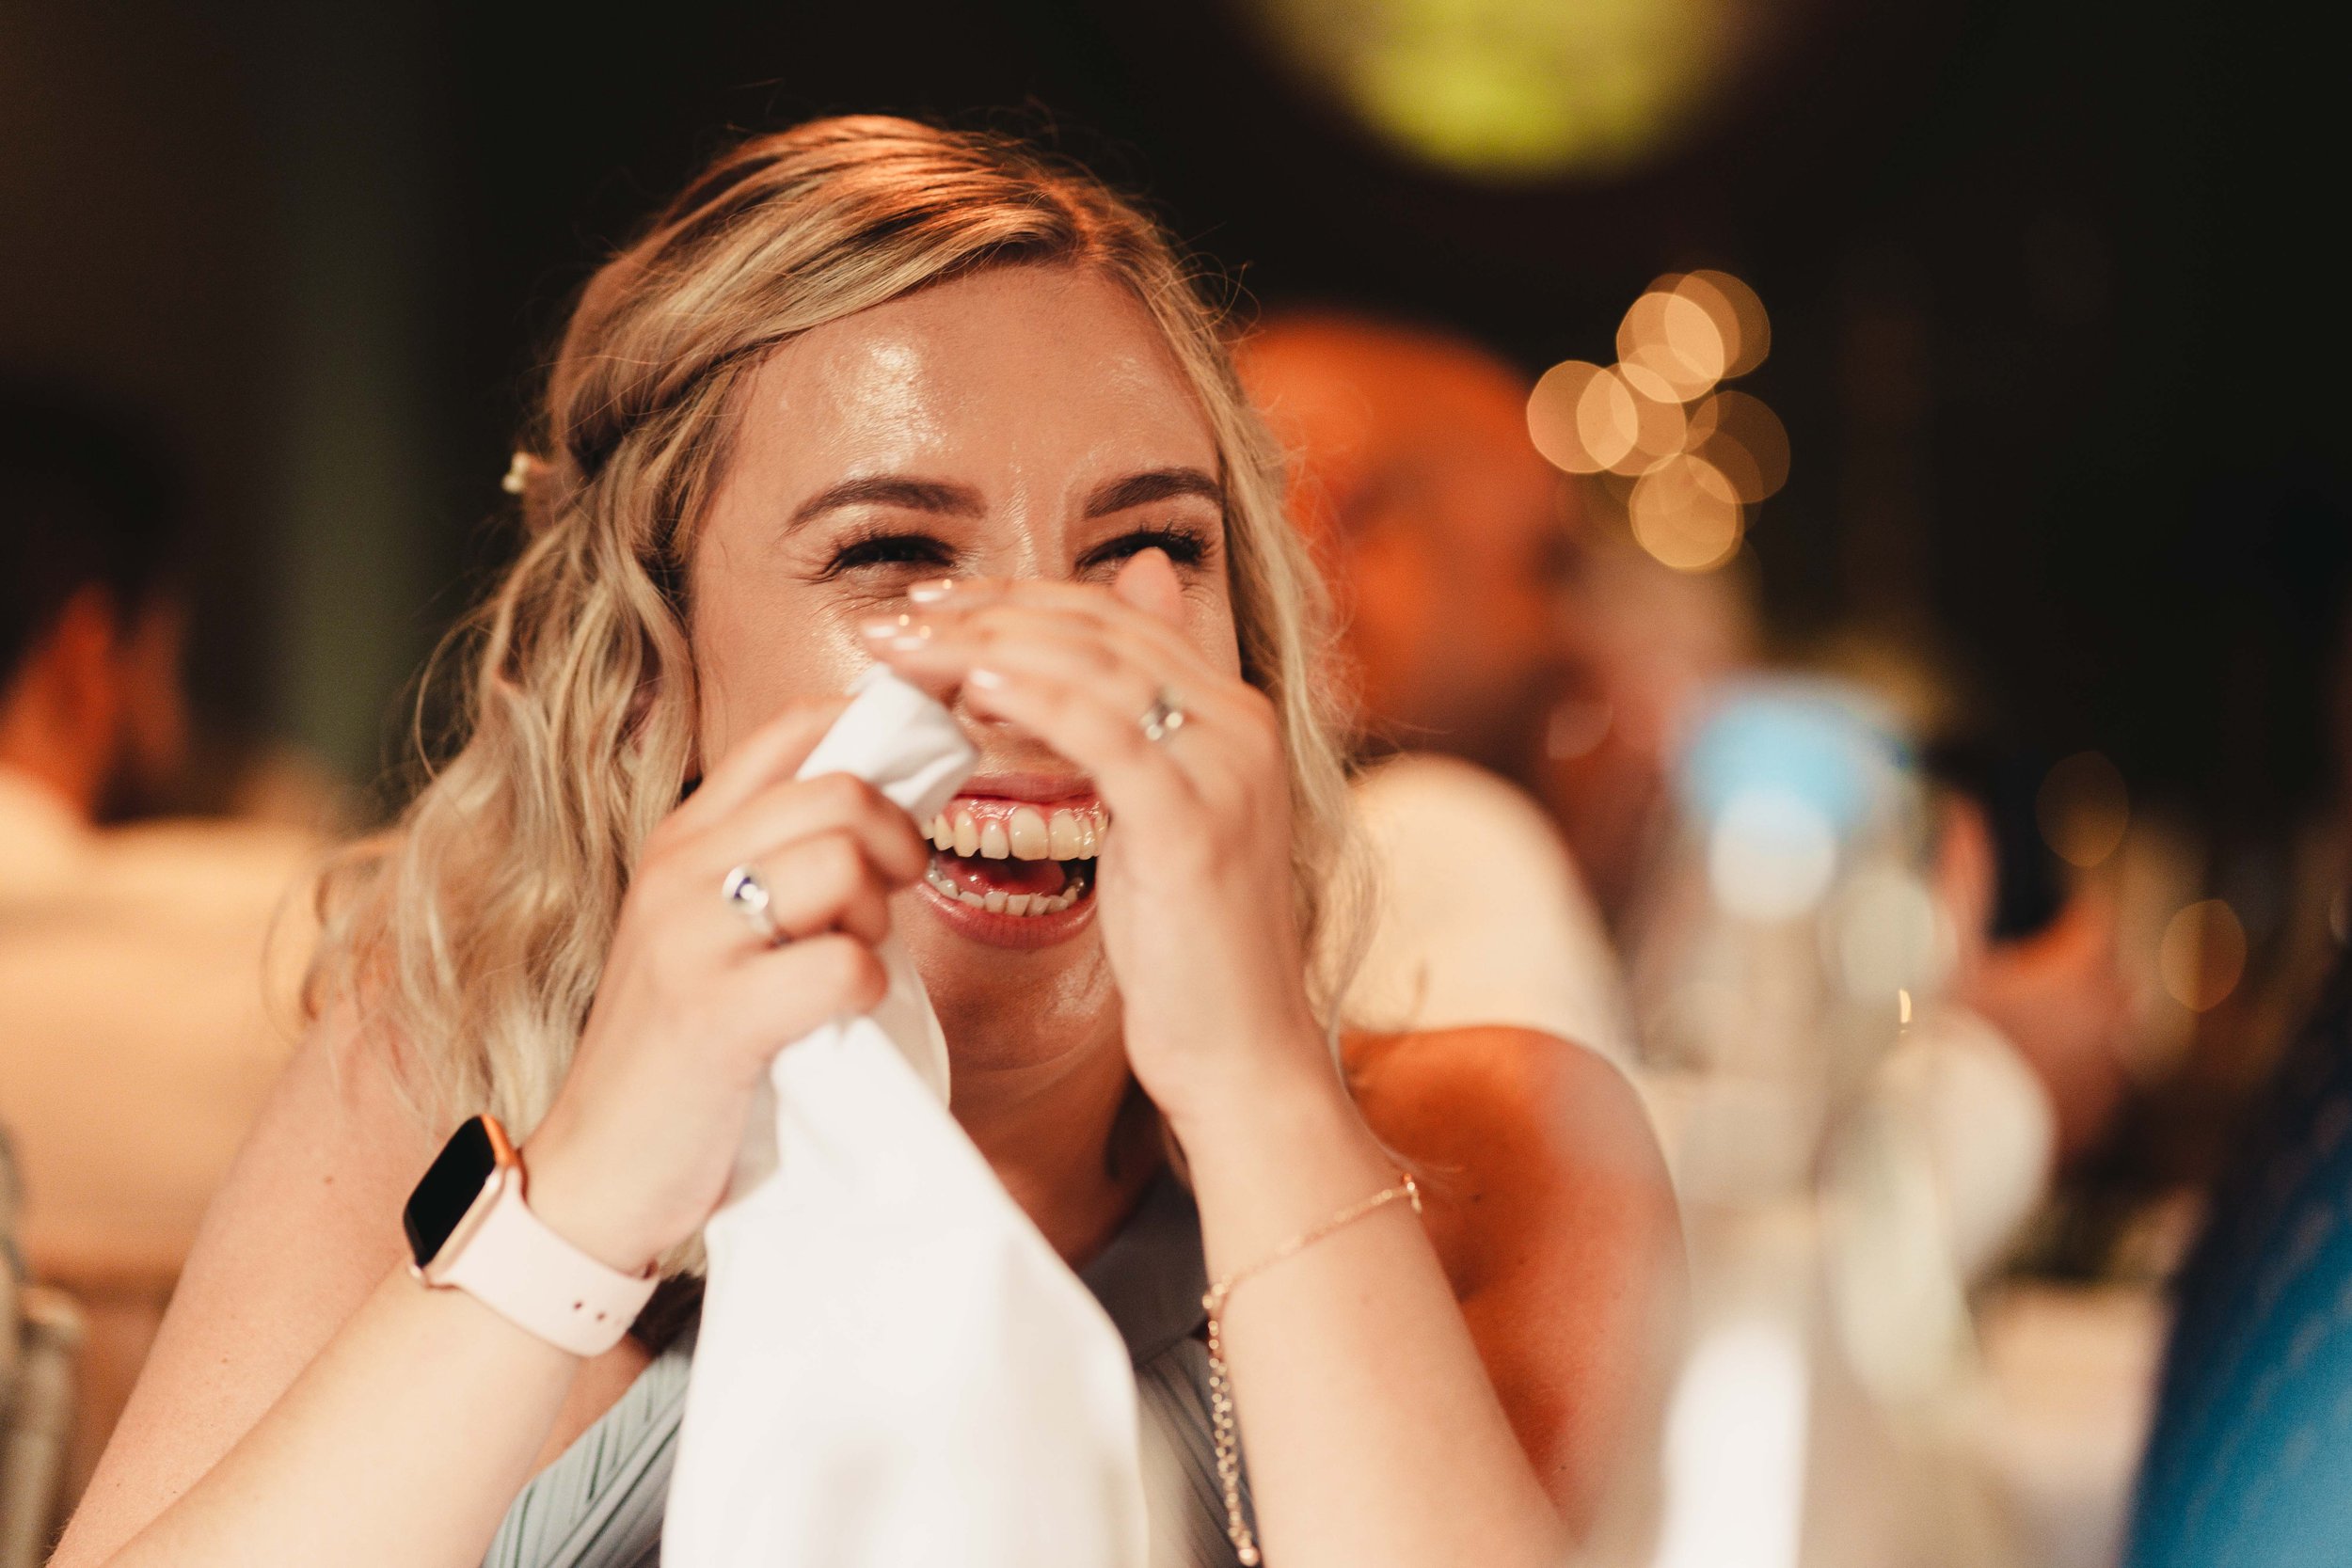 Wedding guest laughing during the speeches